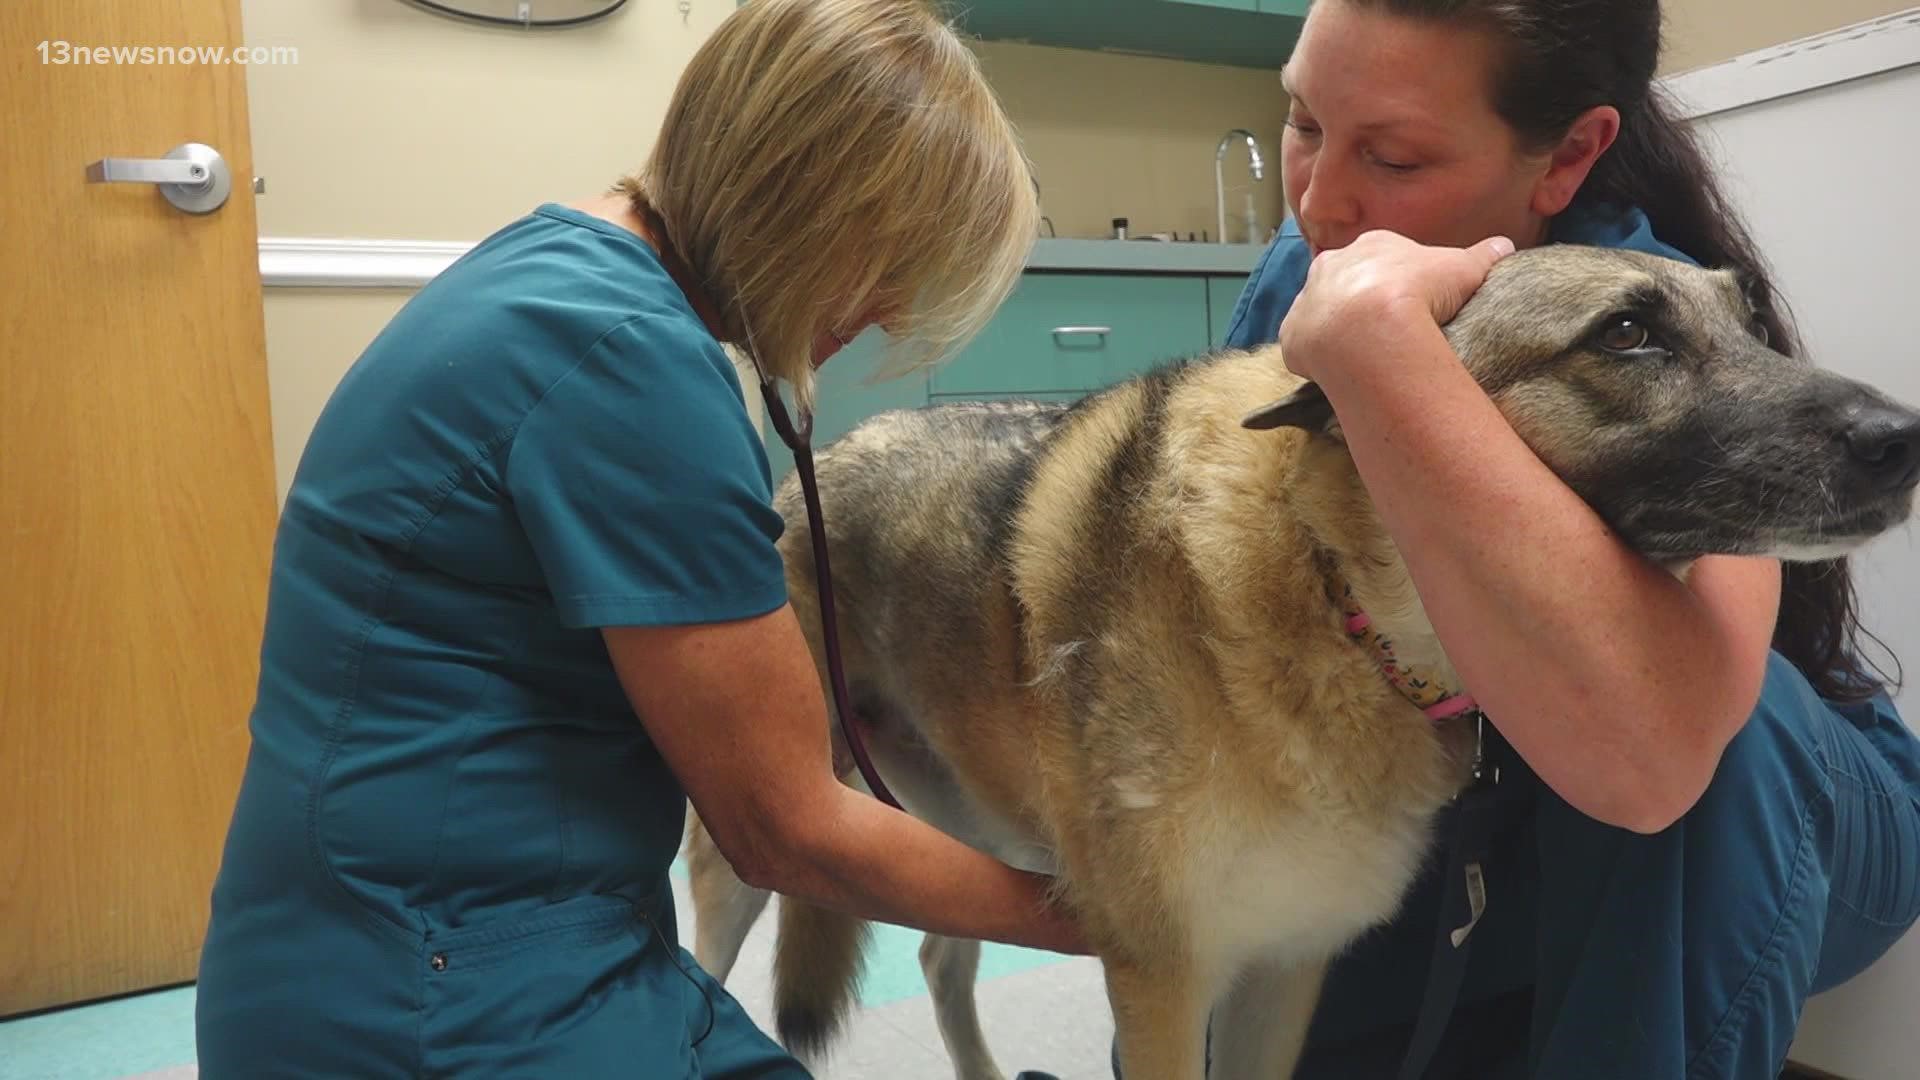 Doctors in the area say a nationwide veterinary shortage is overwhelming clinics and driving up wait times.